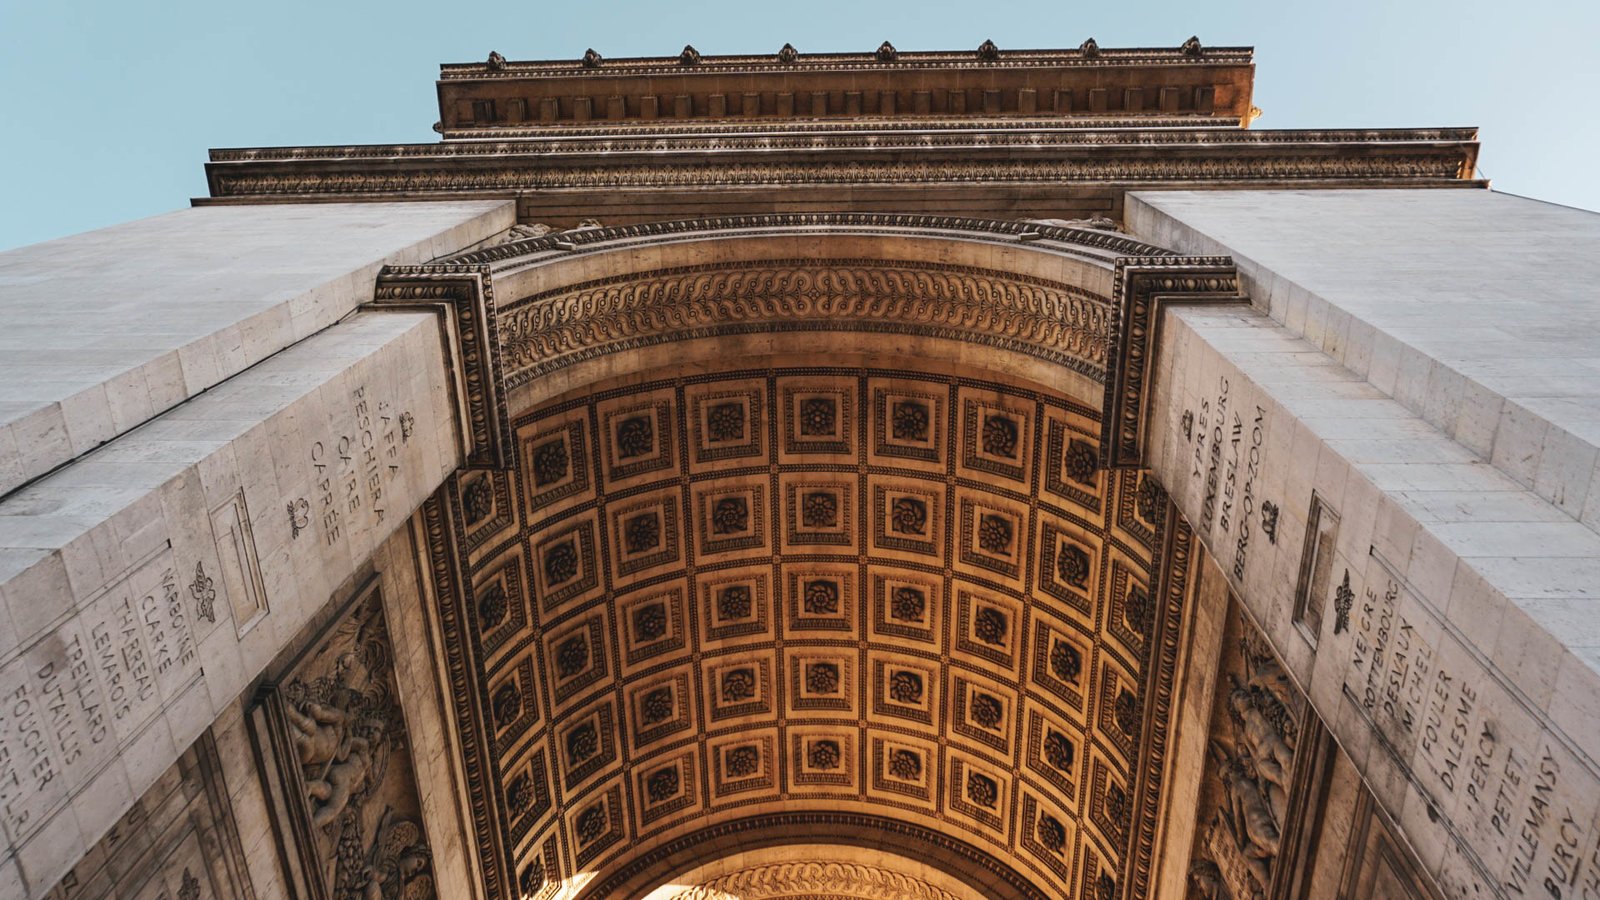 View of the Arc de Triomphe from the bottom